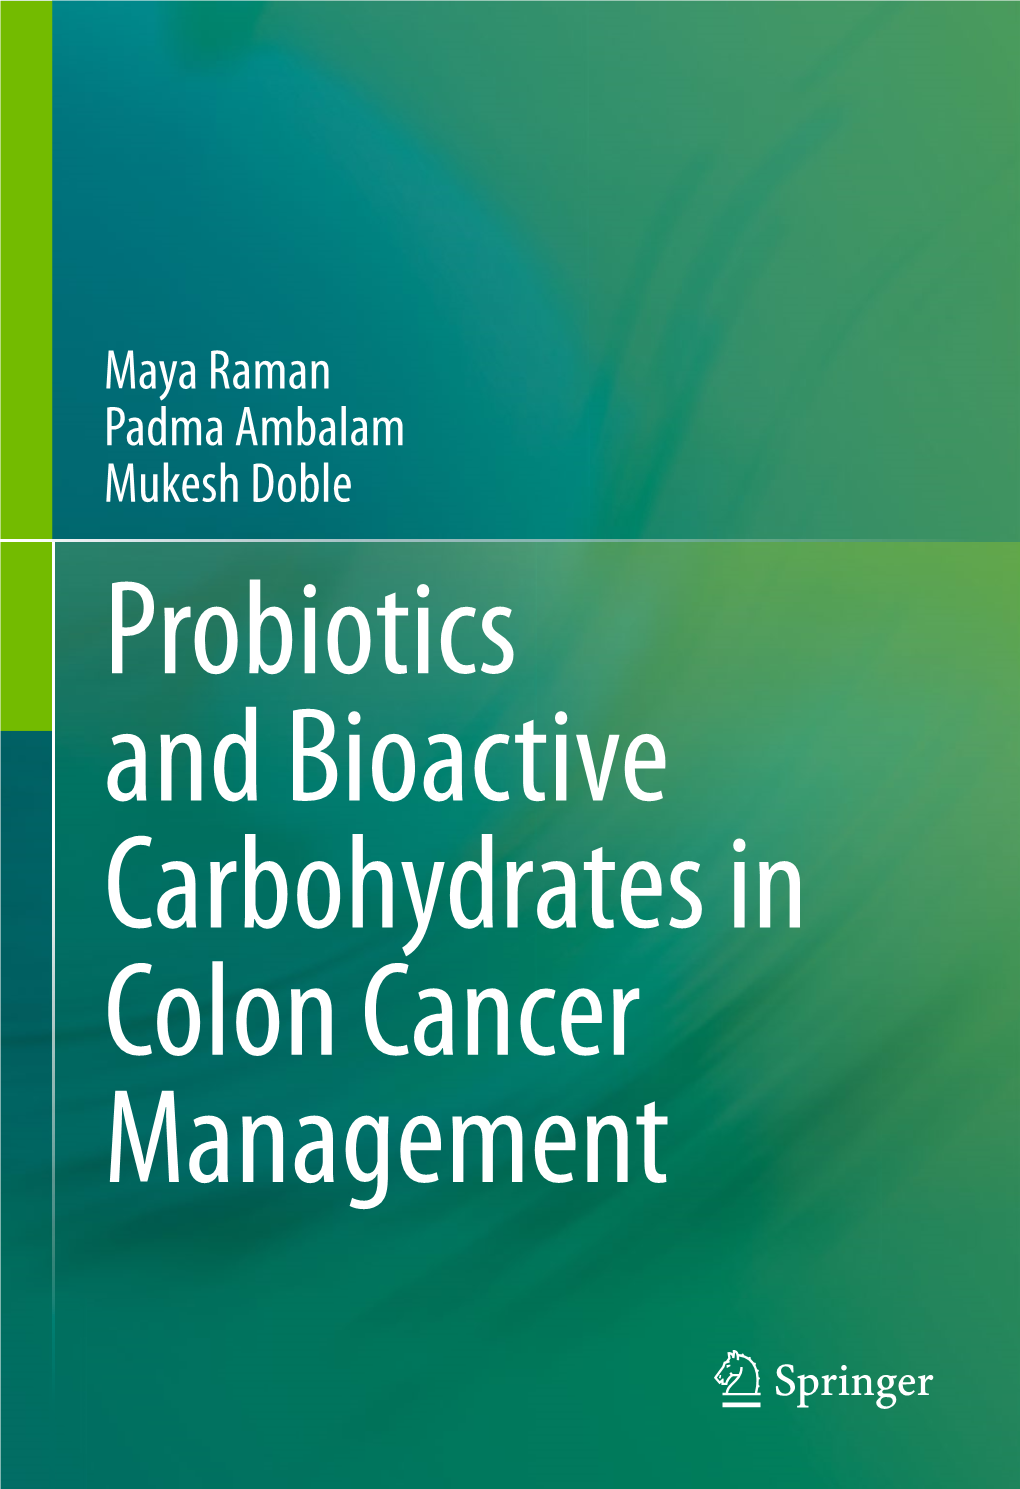 Probiotics and Bioactive Carbohydrates in Colon Cancer Management Probiotics and Bioactive Carbohydrates in Colon Cancer Management